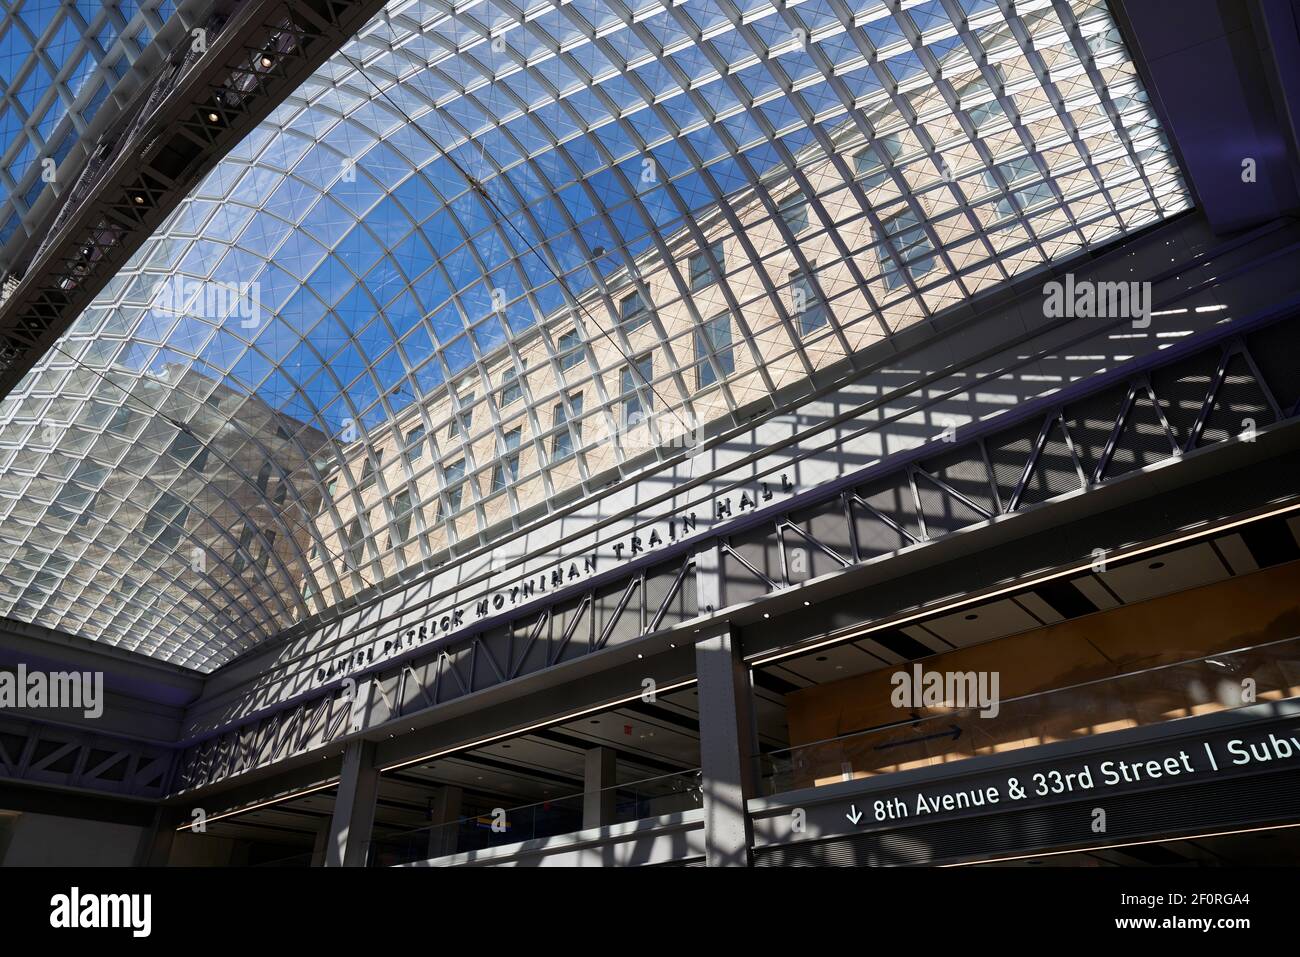 Glass roof over the interior of the Moynihan train hall at Penn Station in New York City. Stock Photo